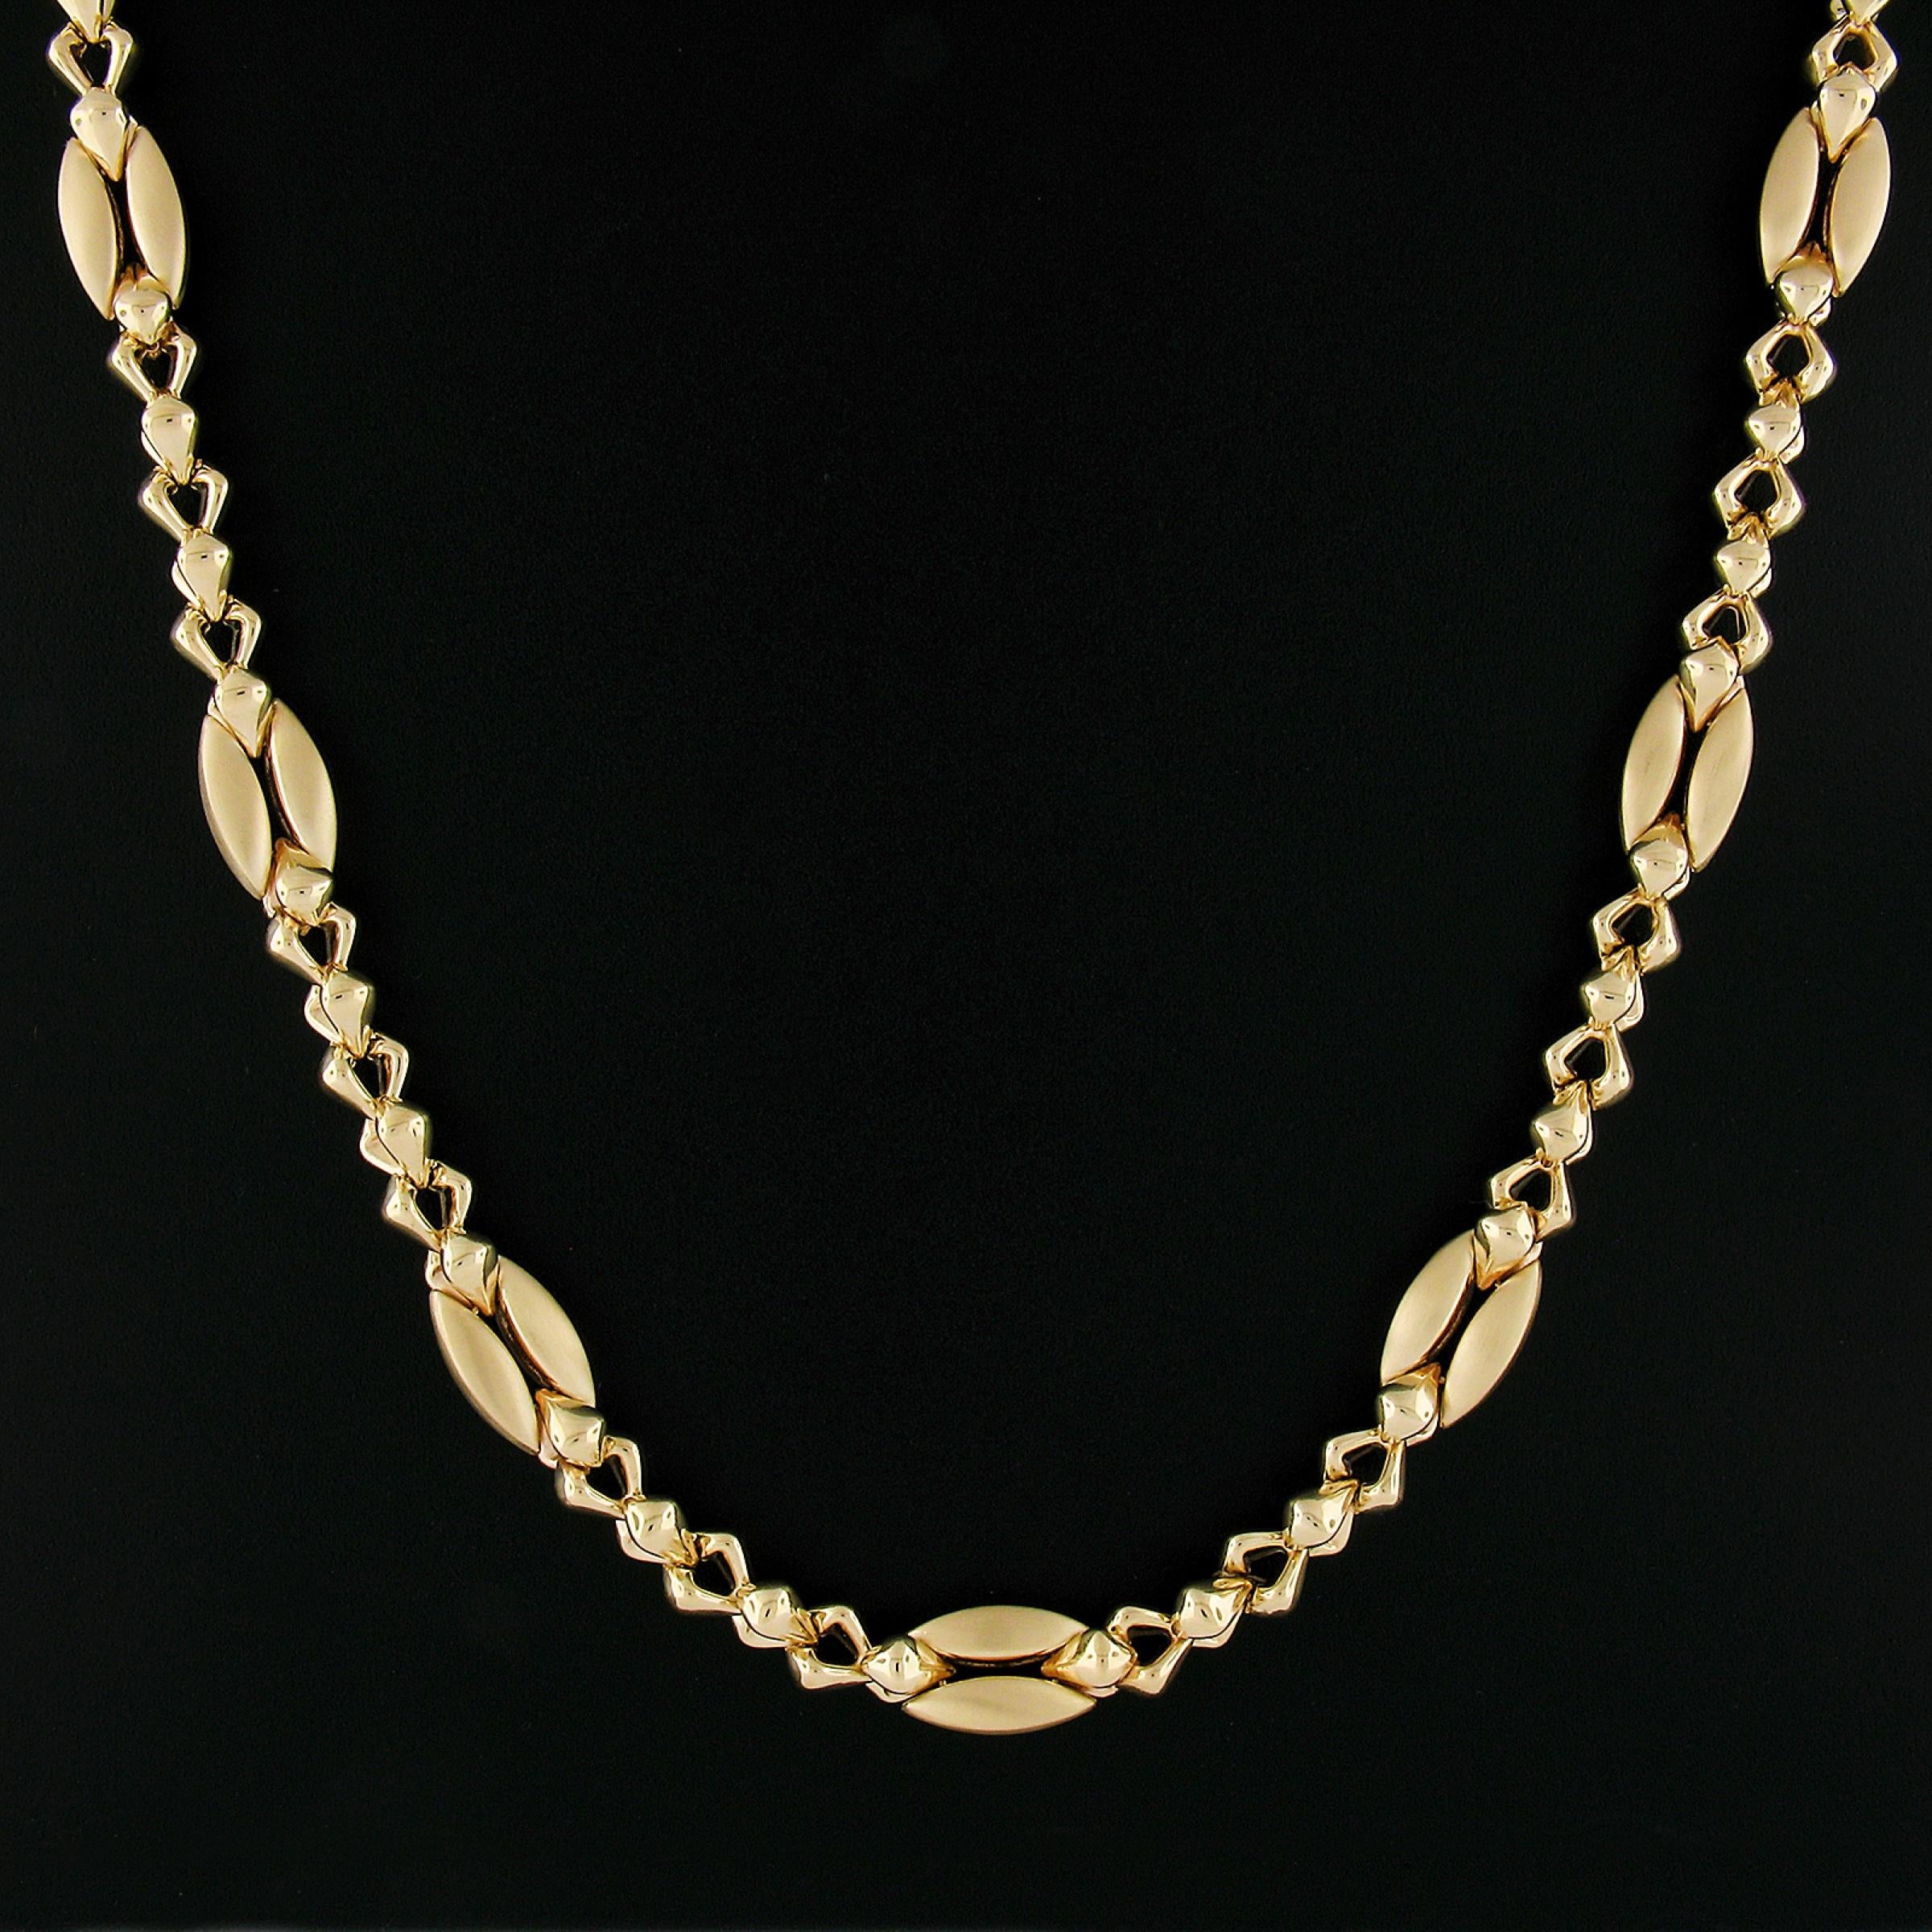 Fancy 14K Gold Long Alternating Polished & Brushed Sections Link Chain Necklace For Sale 1